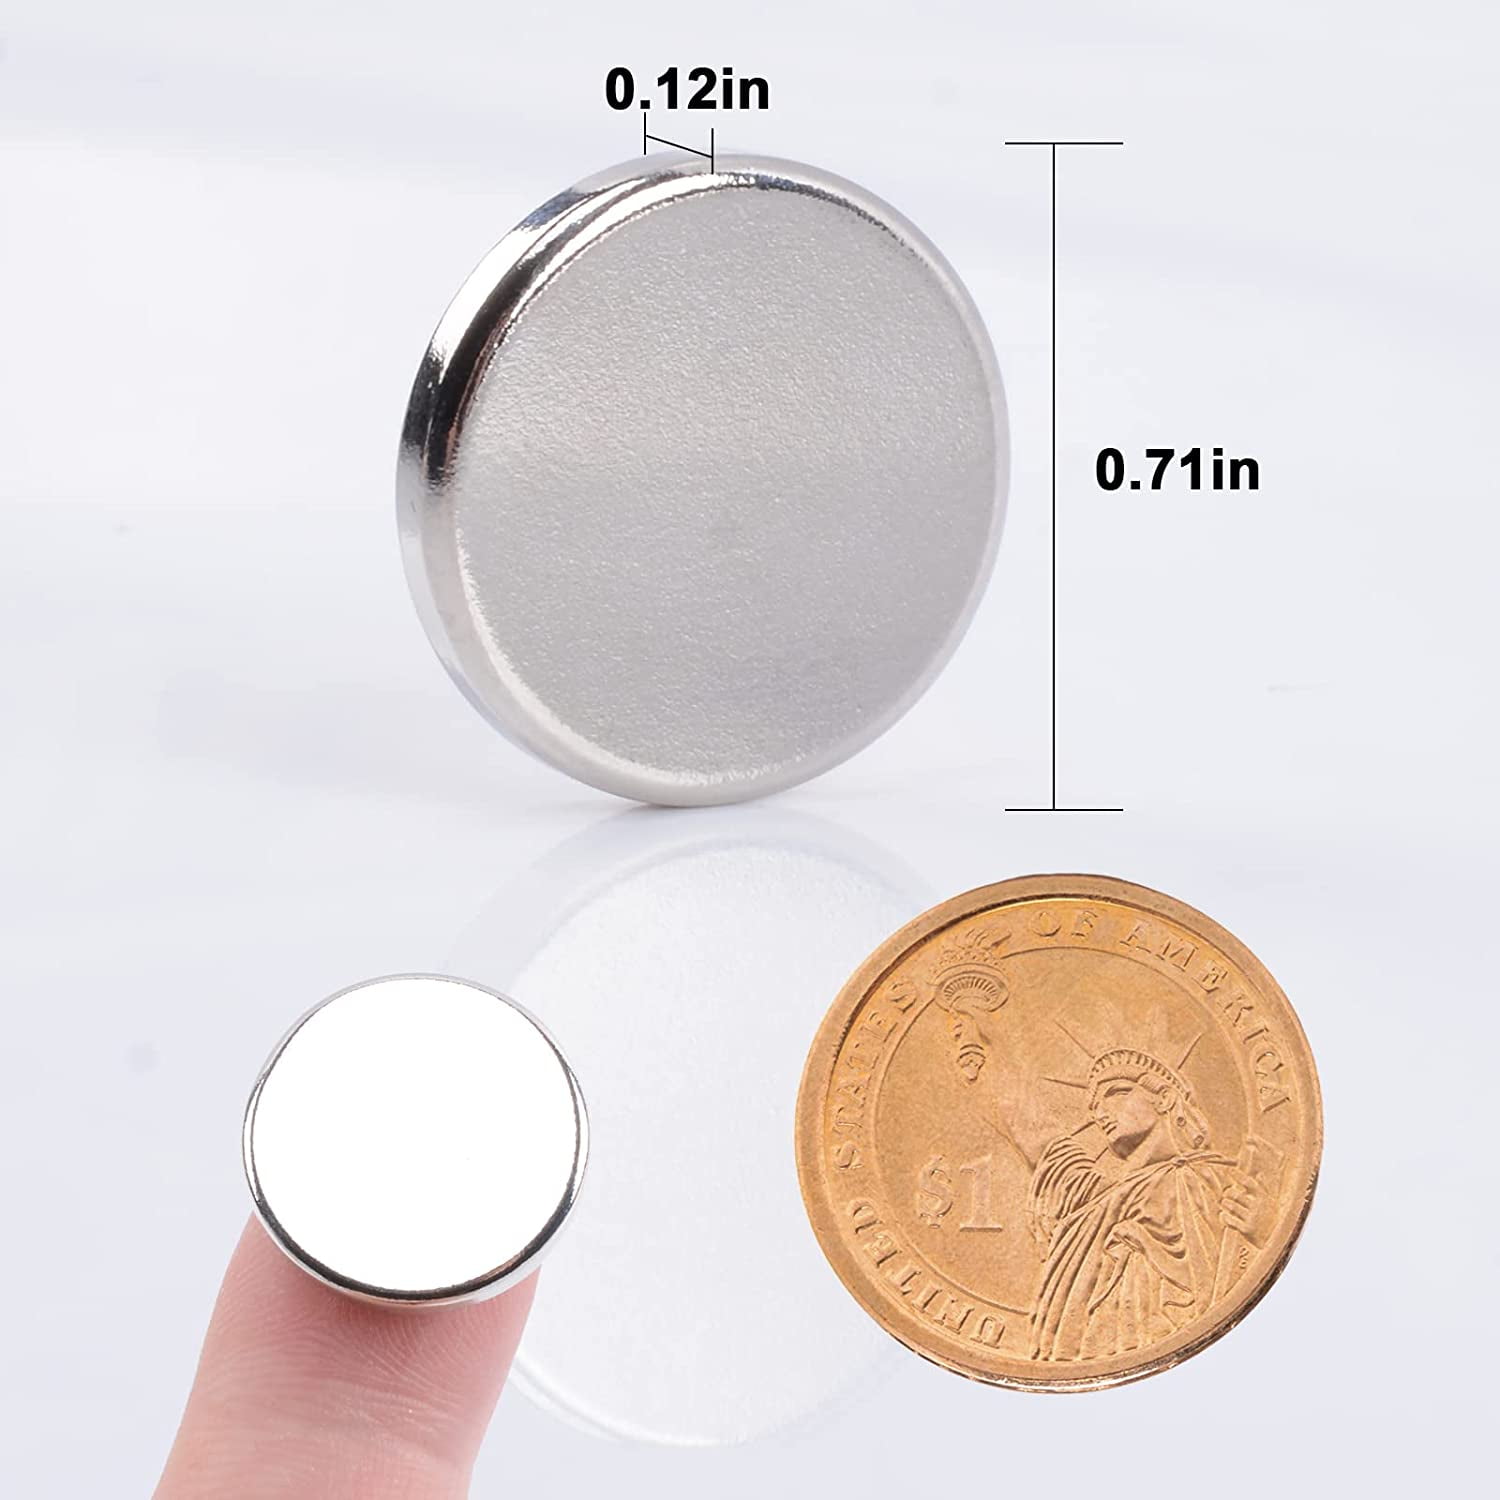 MIN CI 100 Pcs Super Strong Neodymium Disc Small Magnets, 6mm x 3mm Tiny  Magnets for